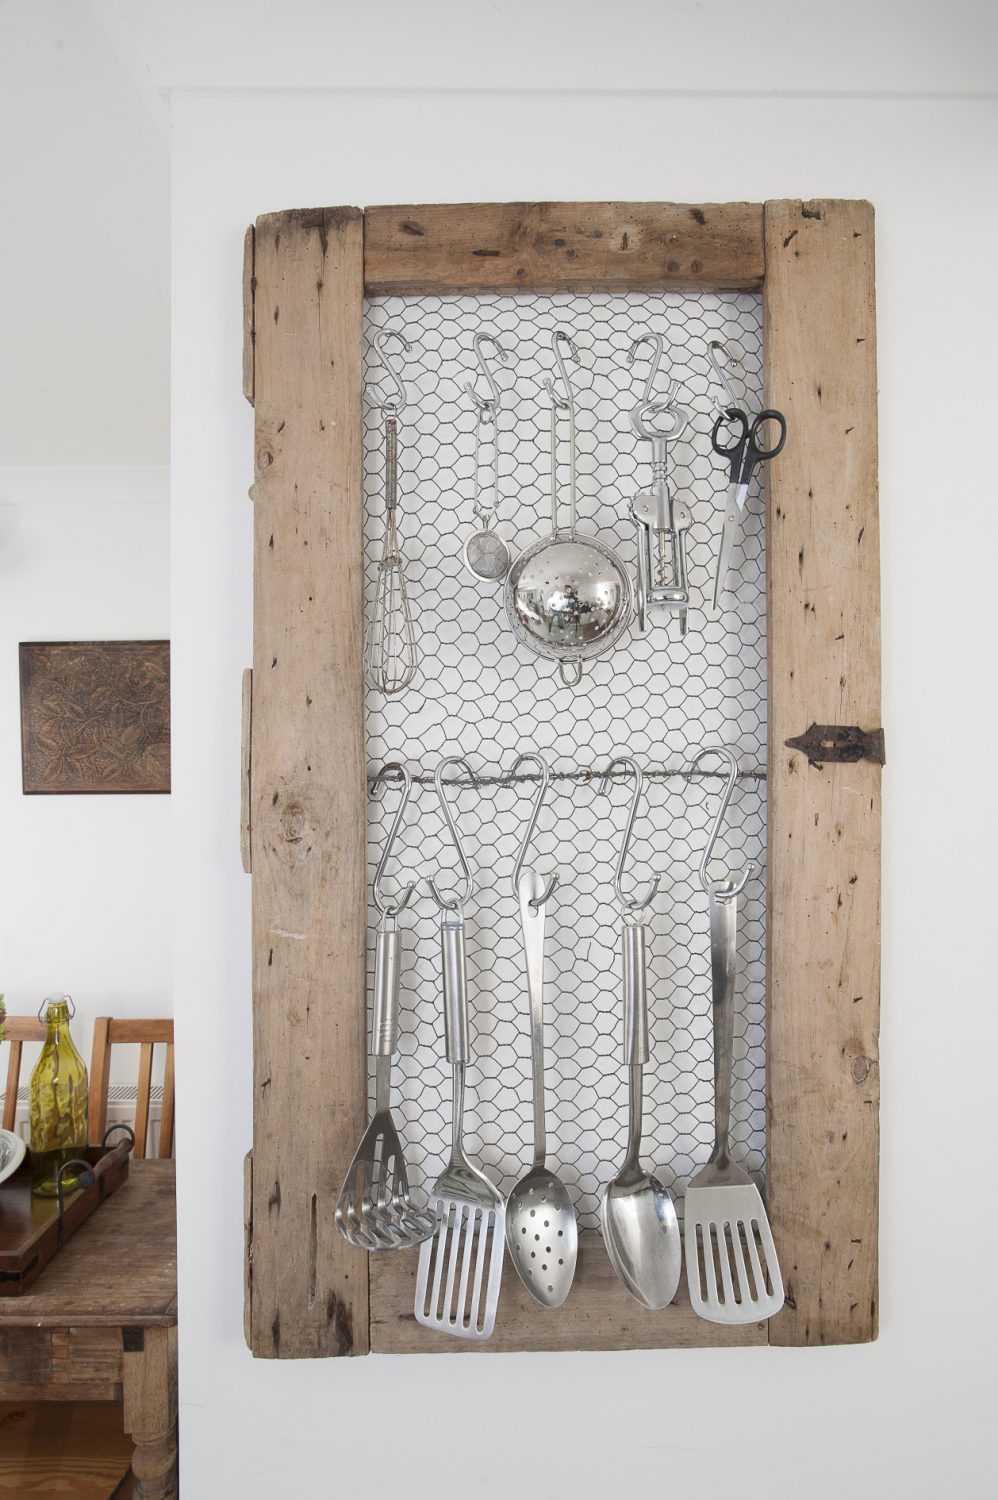 On the wall is a clever French find that has allowed Linda to indulge in her passion of displaying every-day objects: an old pair of cupboard doors backed with chicken wire